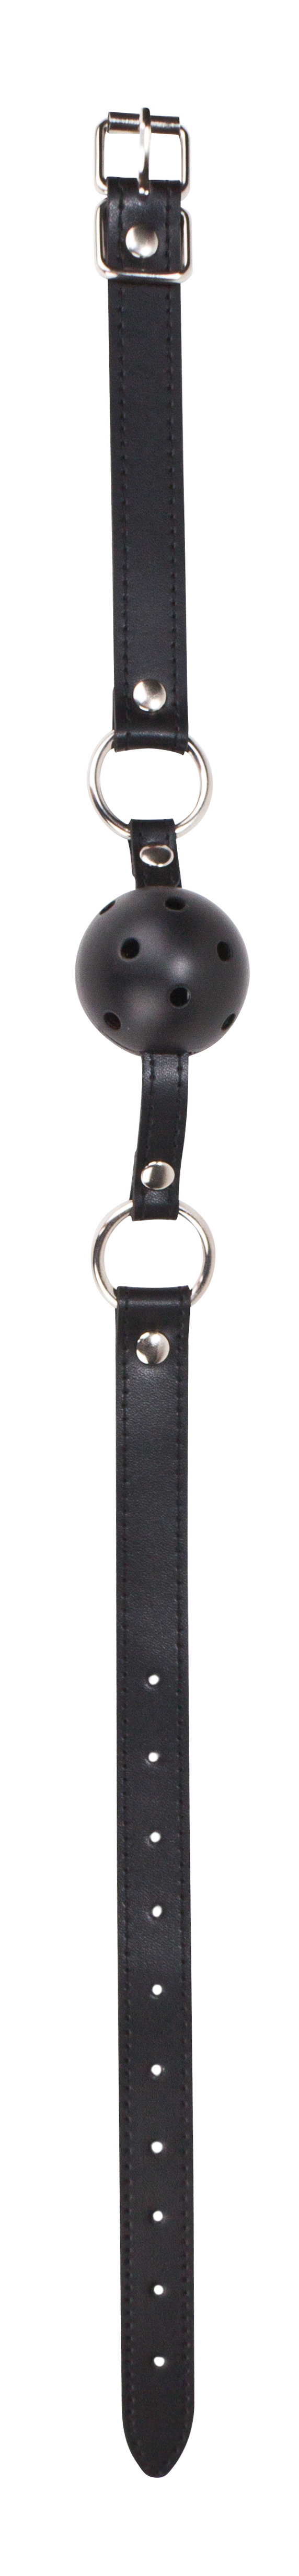 ball gag with leather straps black 